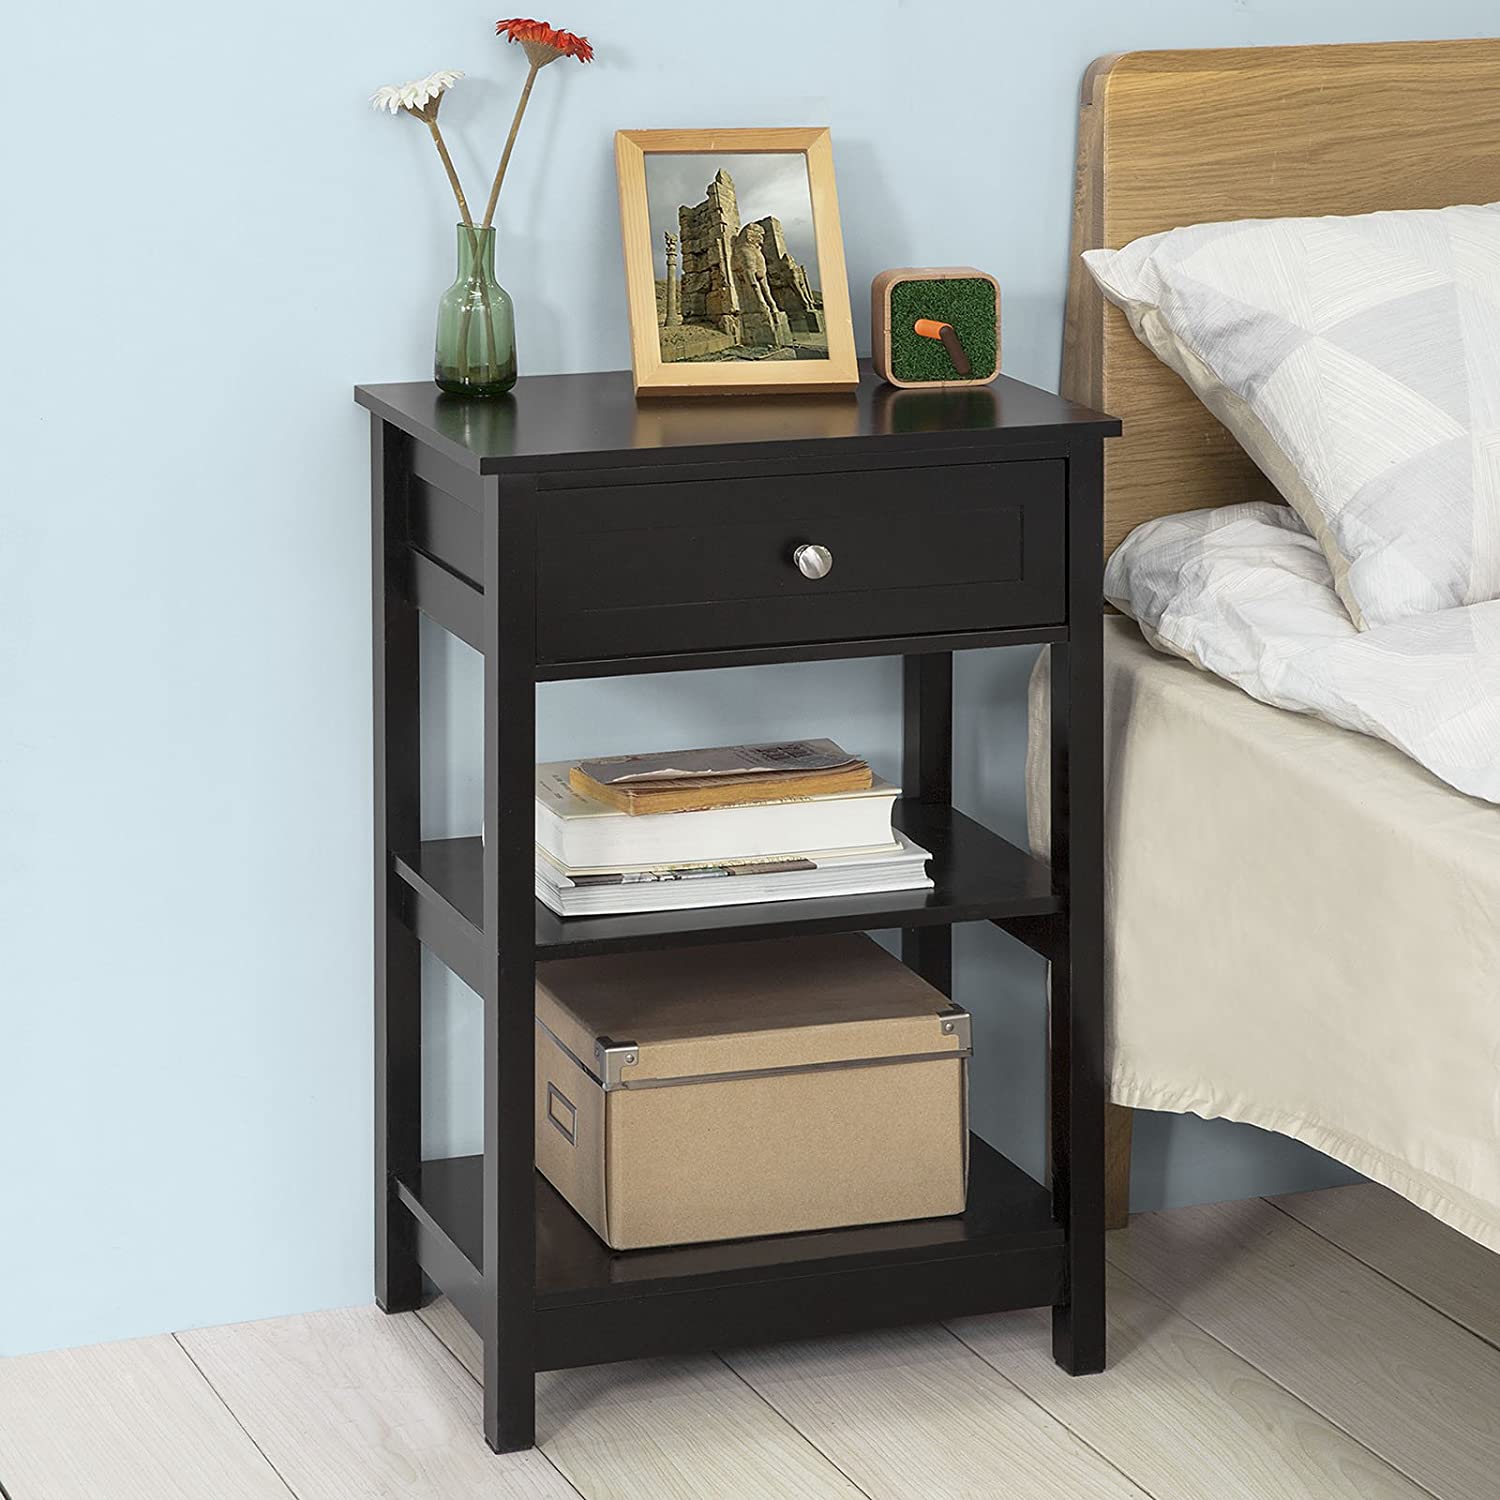 Black Bedside Table with 1 Drawer and 2 Shelves - 0